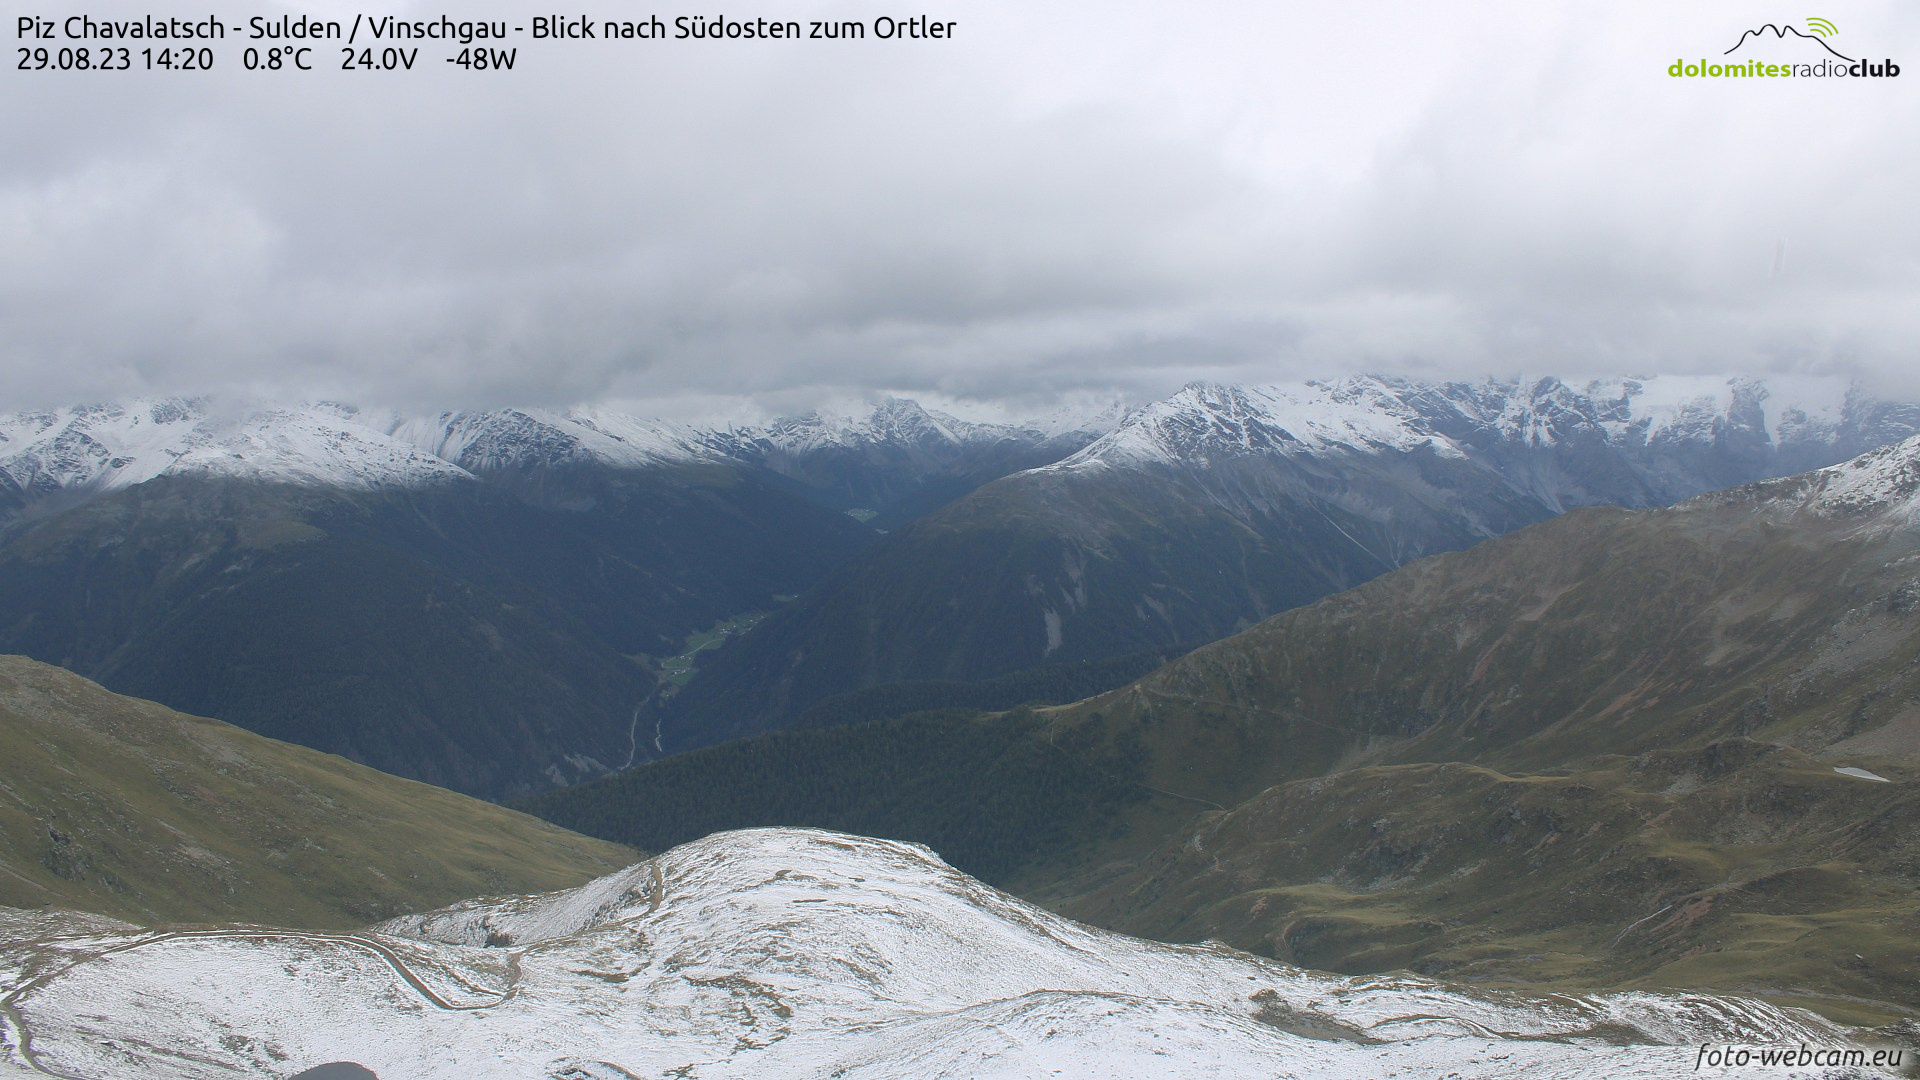 Heavy rain falls in parts of the Alps, with snow falling on the high mountains